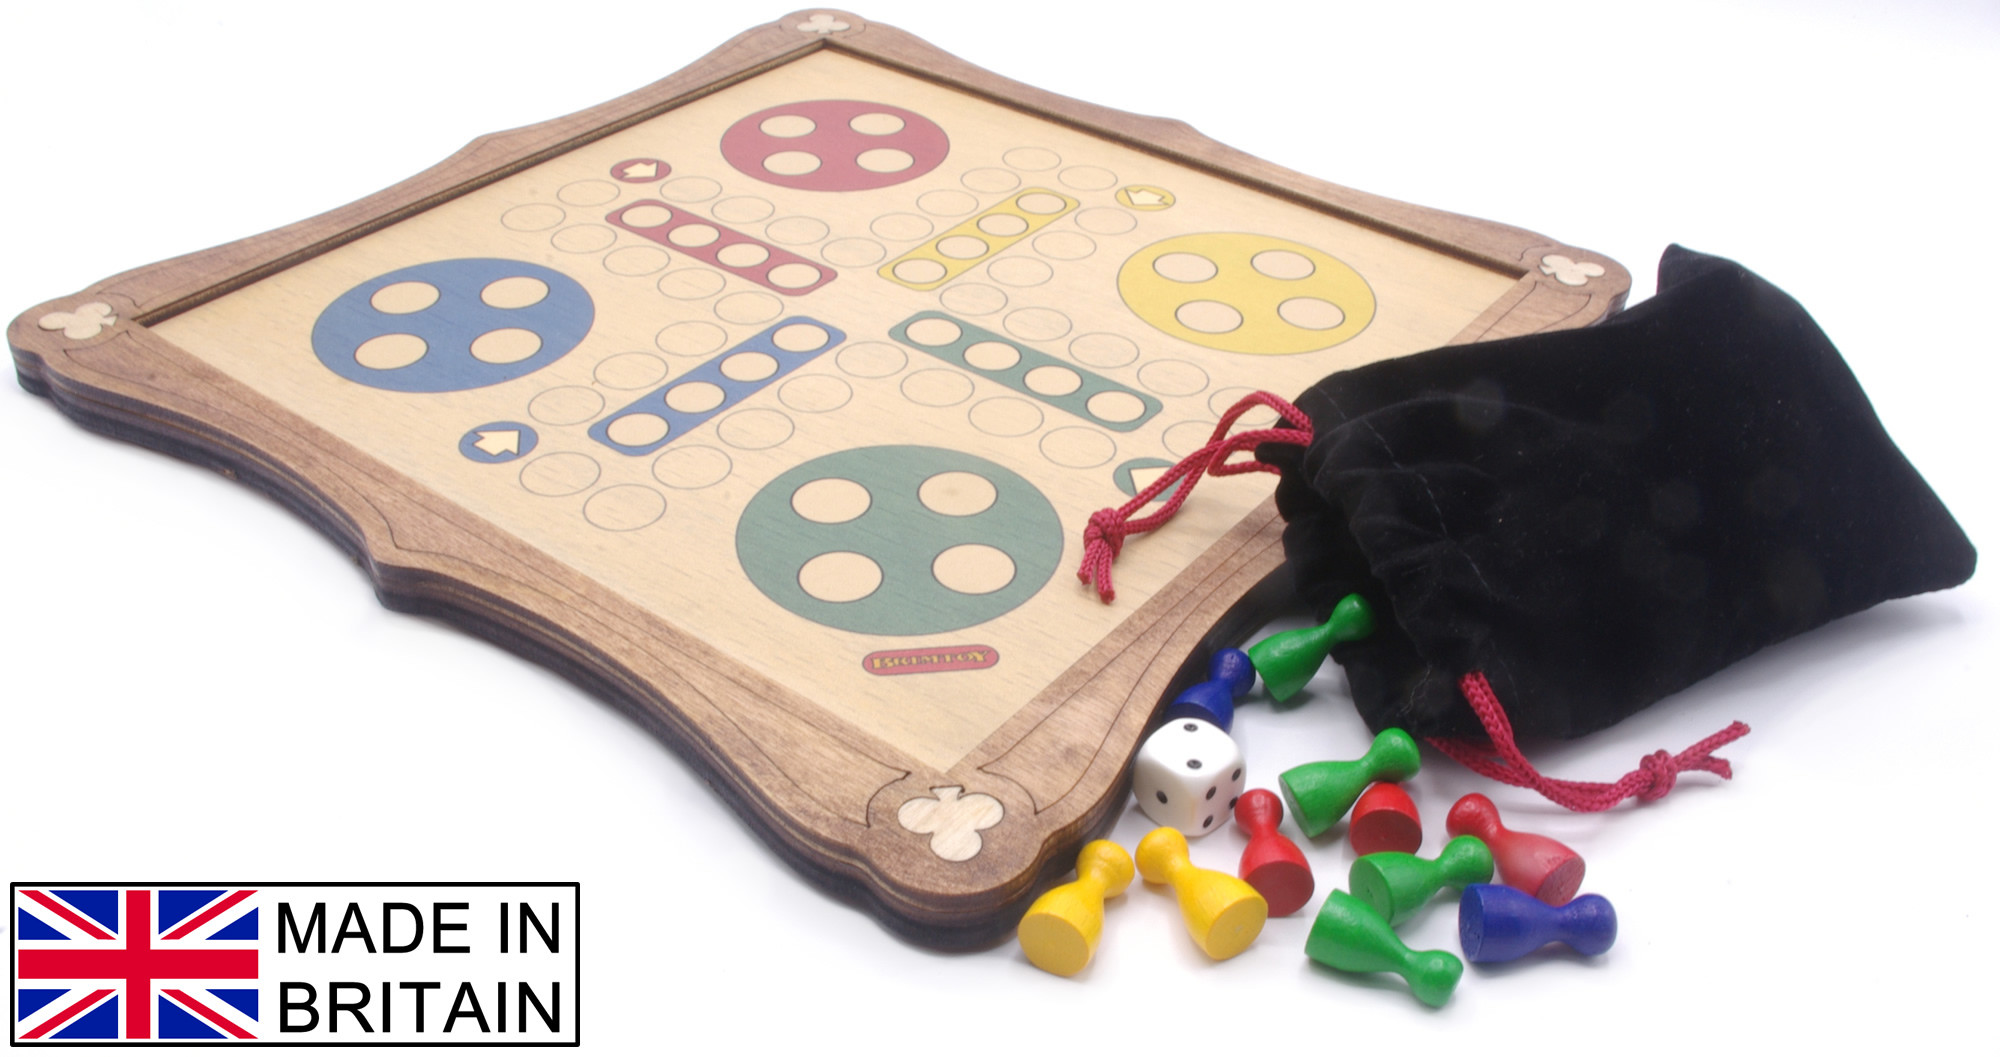 Ludo traditional wooden board game